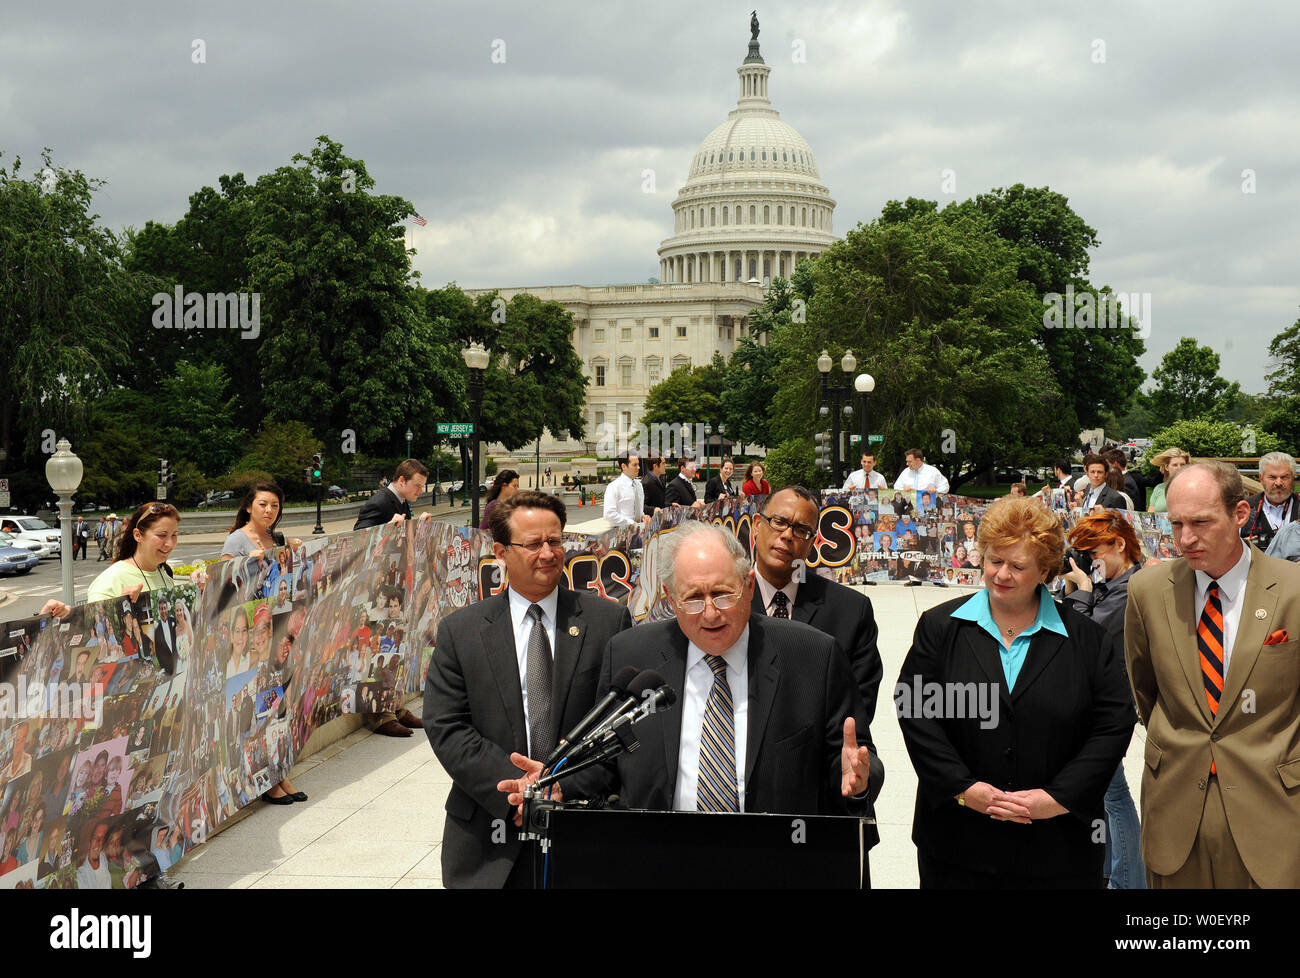 Sen. Carl Levin, D-MI, speaks as volunteers hold a banner over 100 feet long with more than 4,000 photos of Americans affected by downturn in the auto industry on Capitol Hill in Washington on May 14, 2009. The banner is part of the 'Faces Not Numbers' campaign started by Detroit radio station WCSX 94.7. From left are Rep. Gary Peters, R-MI, Levin, un unidentified man, Sen. Debbie Stabenow, D-MI, and Rep. Thaddeus McCotter, R-MI.      (UPI Photo/Roger L. Wollenberg) Stock Photo